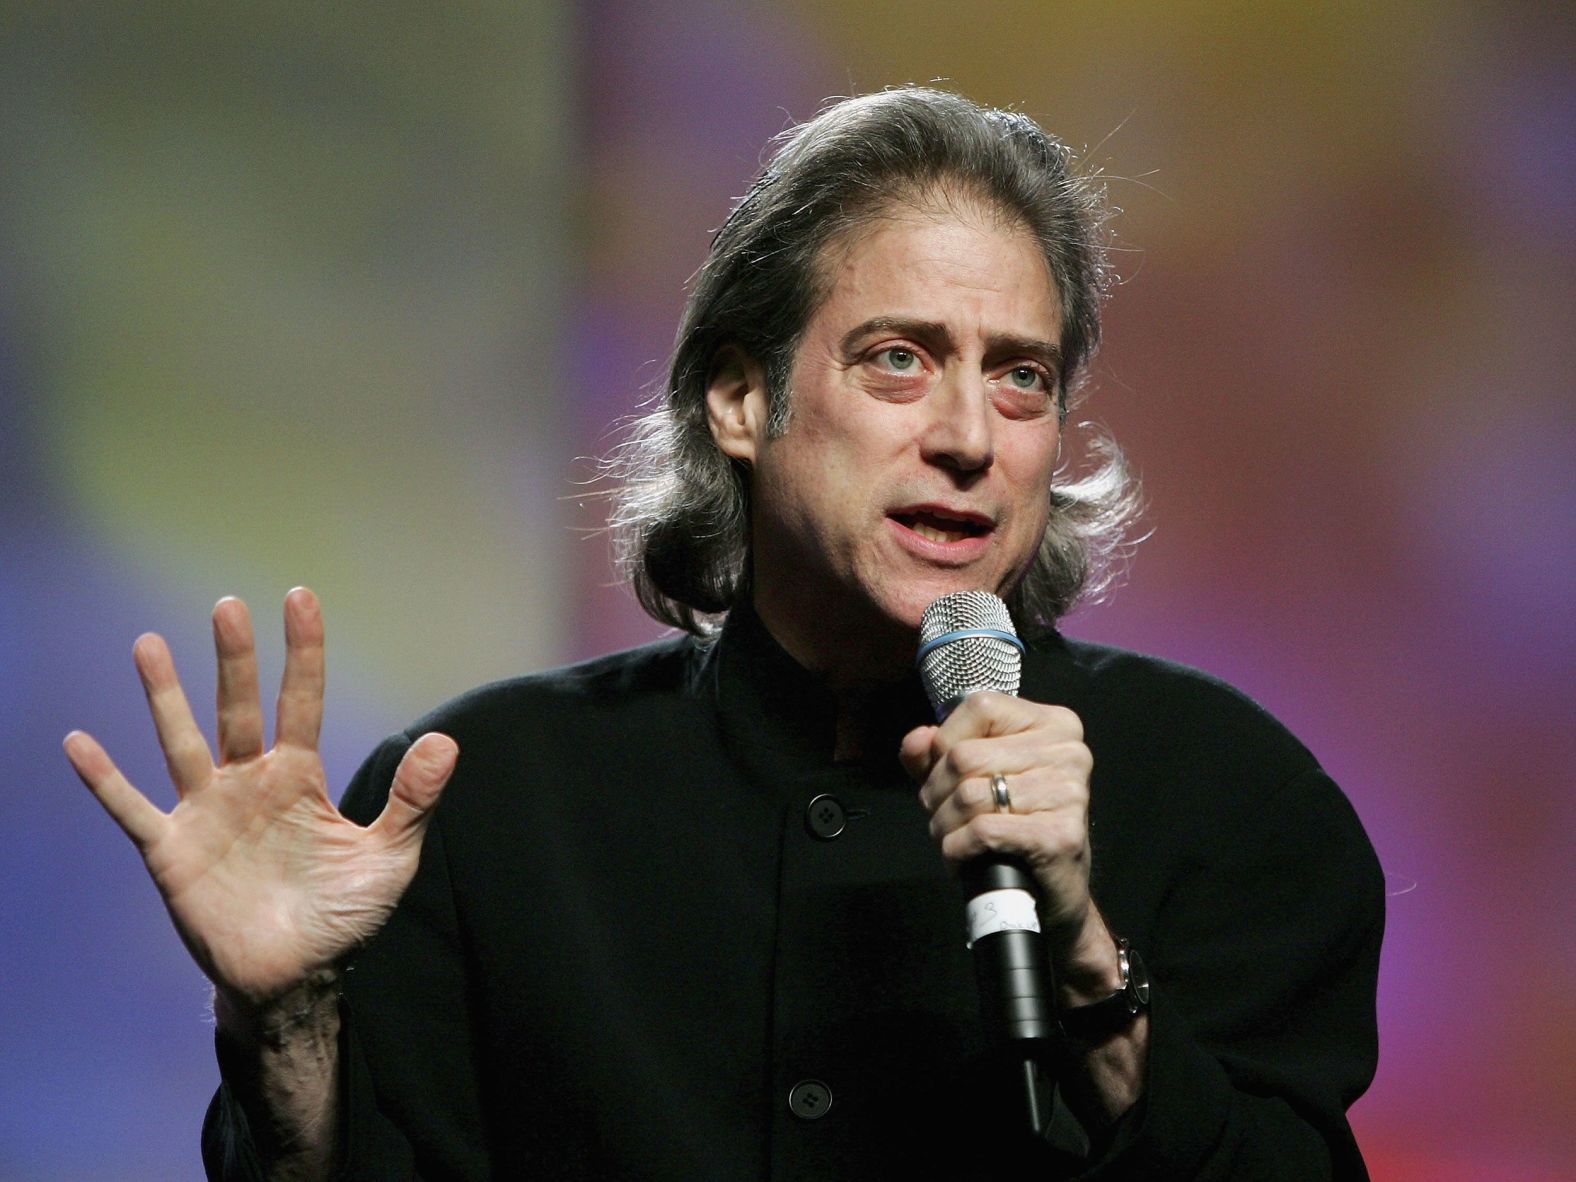 Comedian and actor <a href="https://www.cnn.com/2024/02/28/entertainment/richard-lewis-death/index.html" target="_blank">Richard Lewis</a>, whose self-deprecating humor and acerbic wit in shows like "Curb Your Enthusiasm" and "Anything but Love" entertained audiences for decades, died on February 27, according to his publicist Jeff Abraham. He was 76.